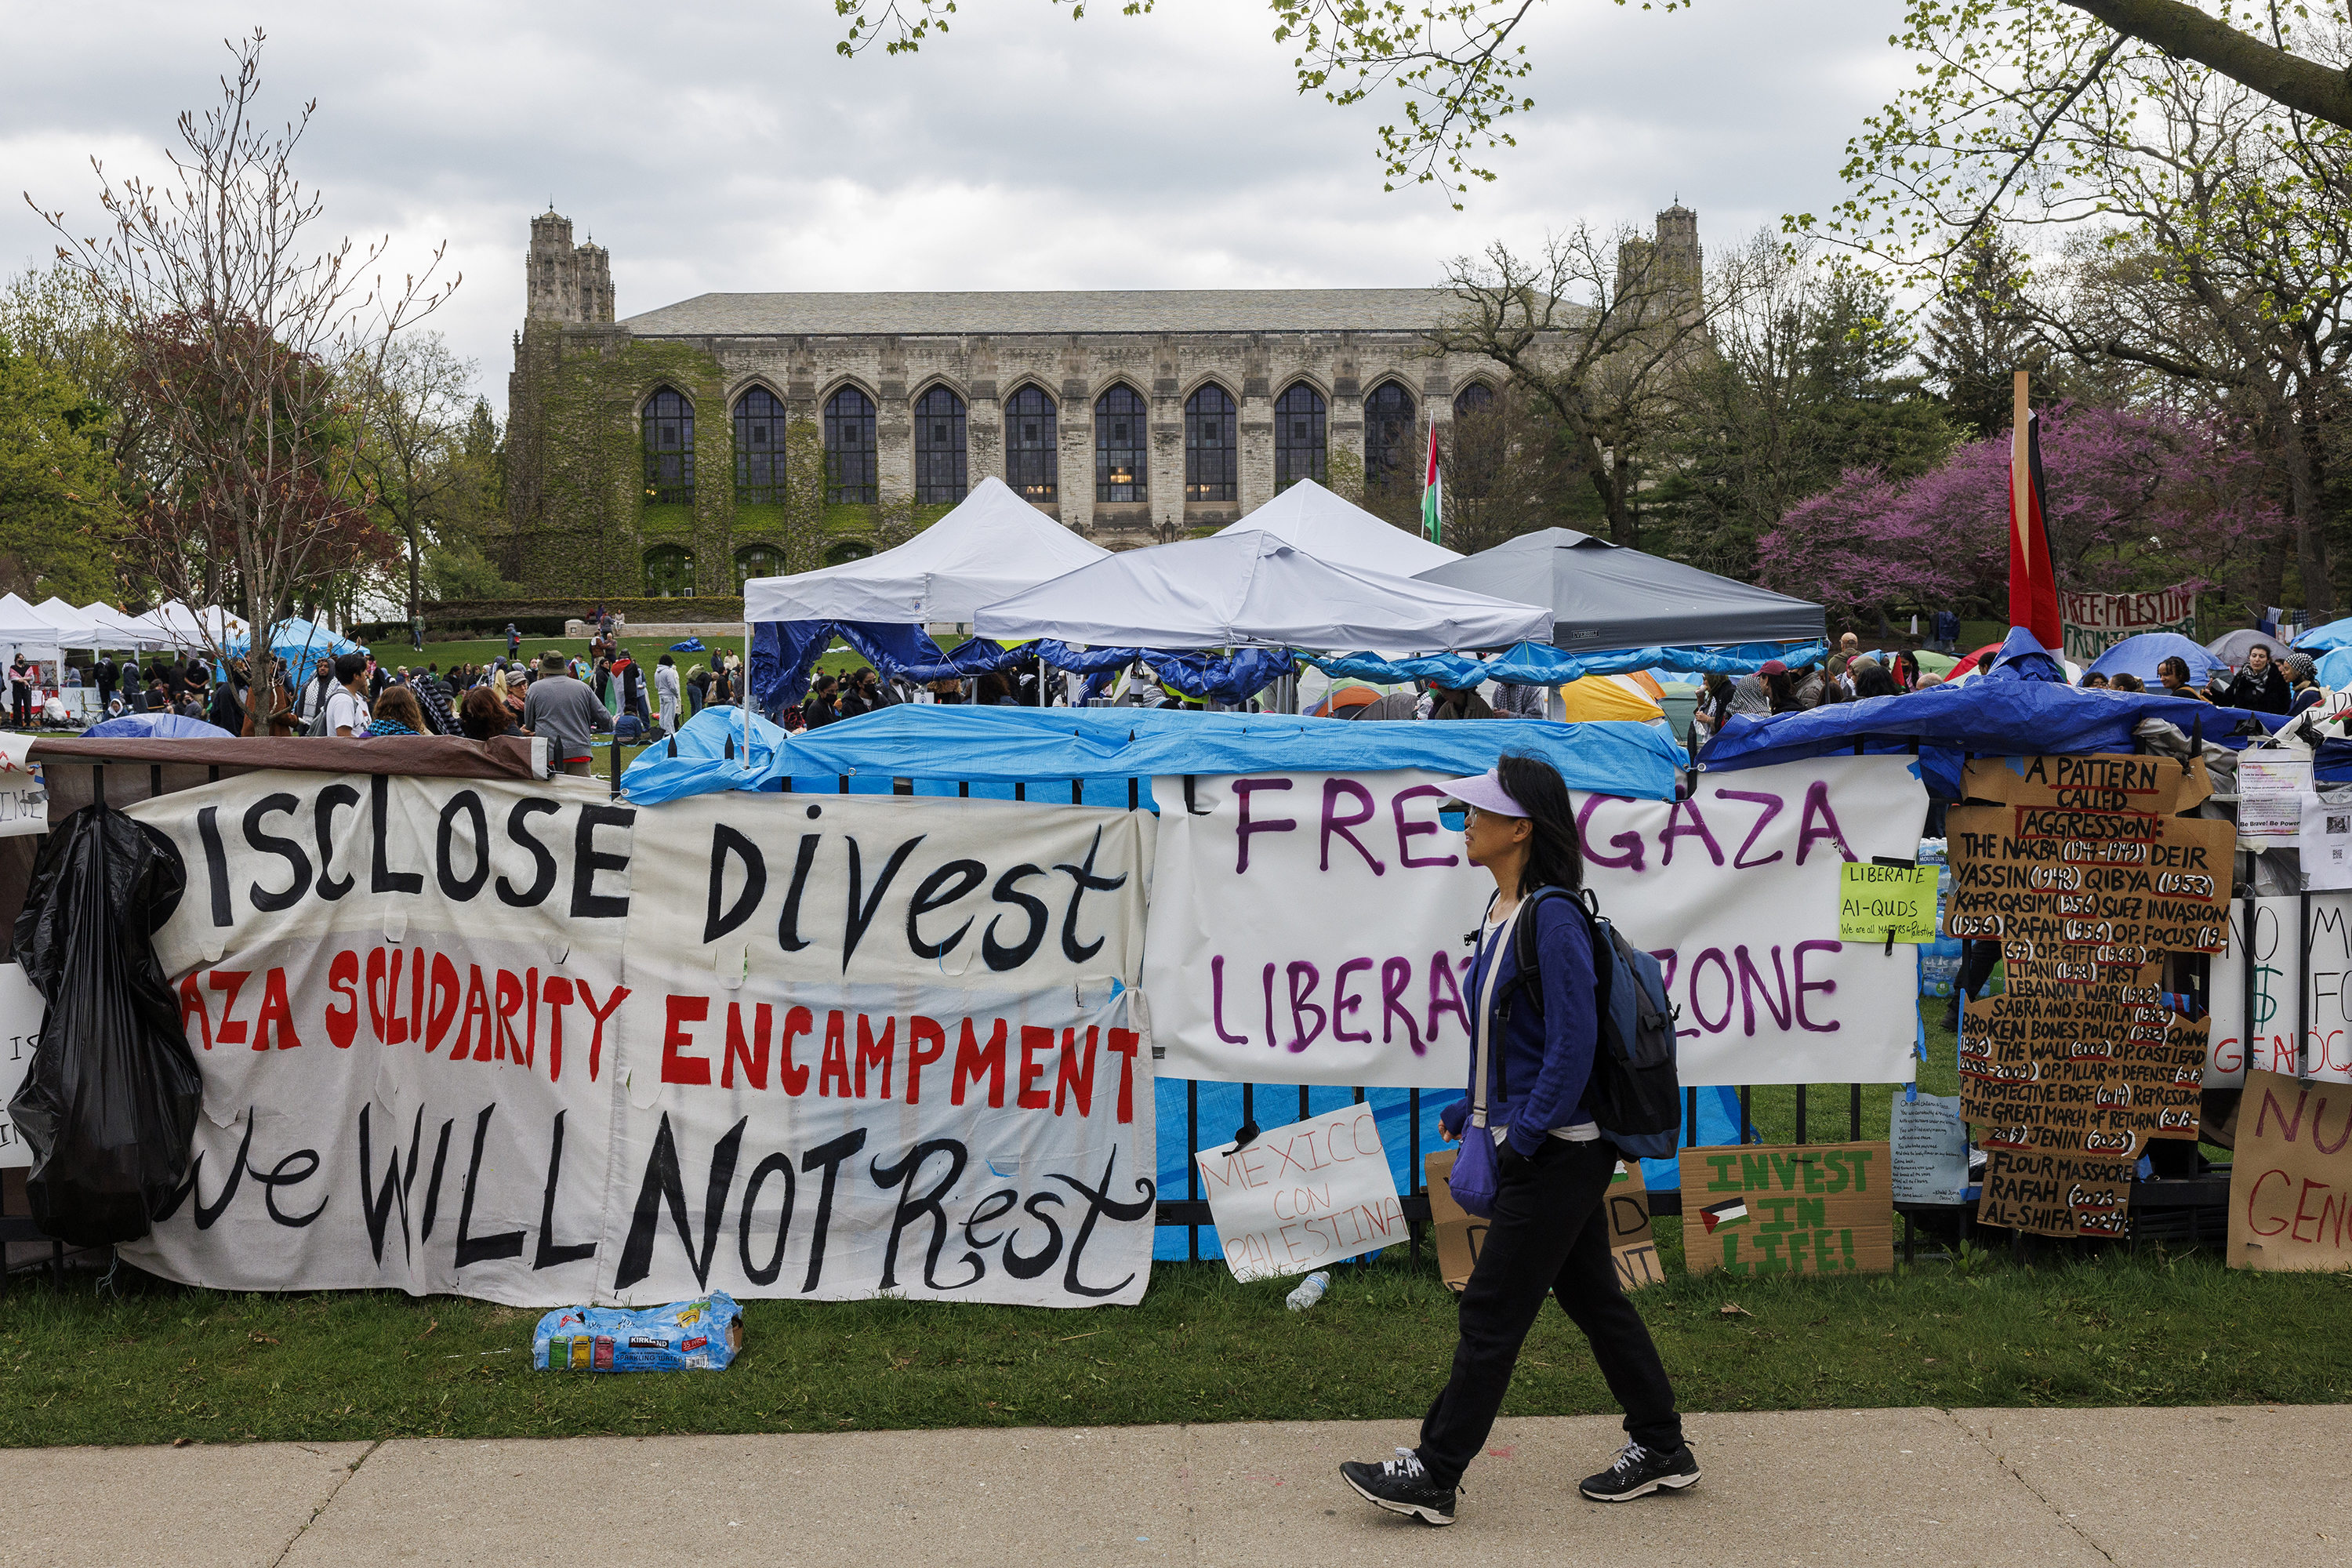 northwestern university reaches agreement with protesters